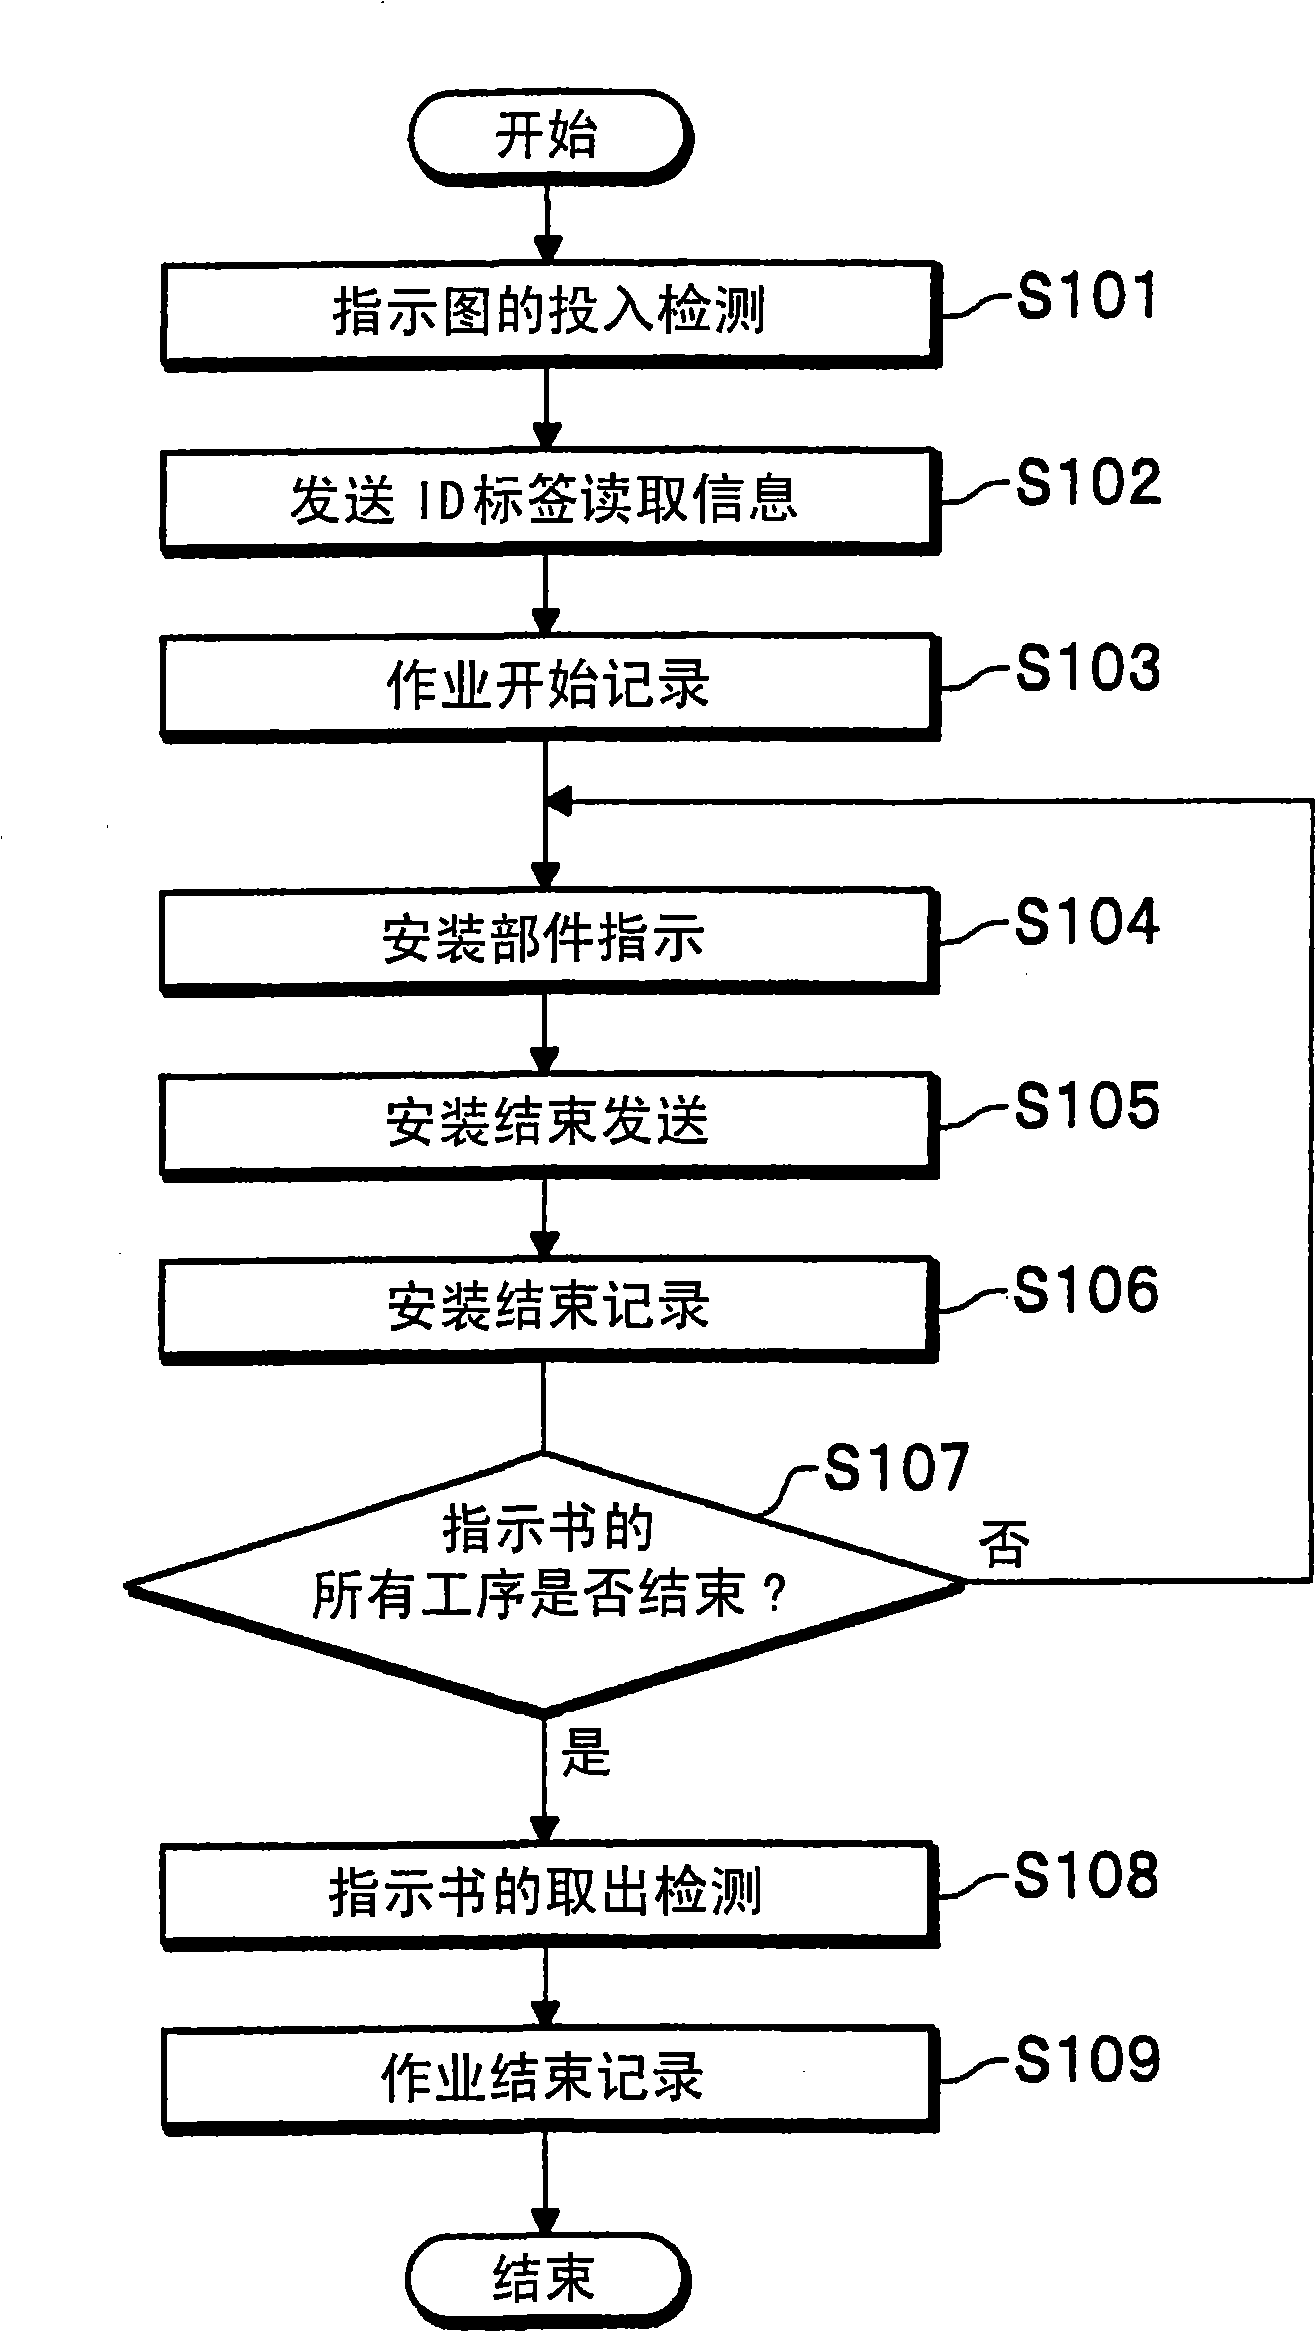 Device, system, method and program of workability management, system, and picking truck